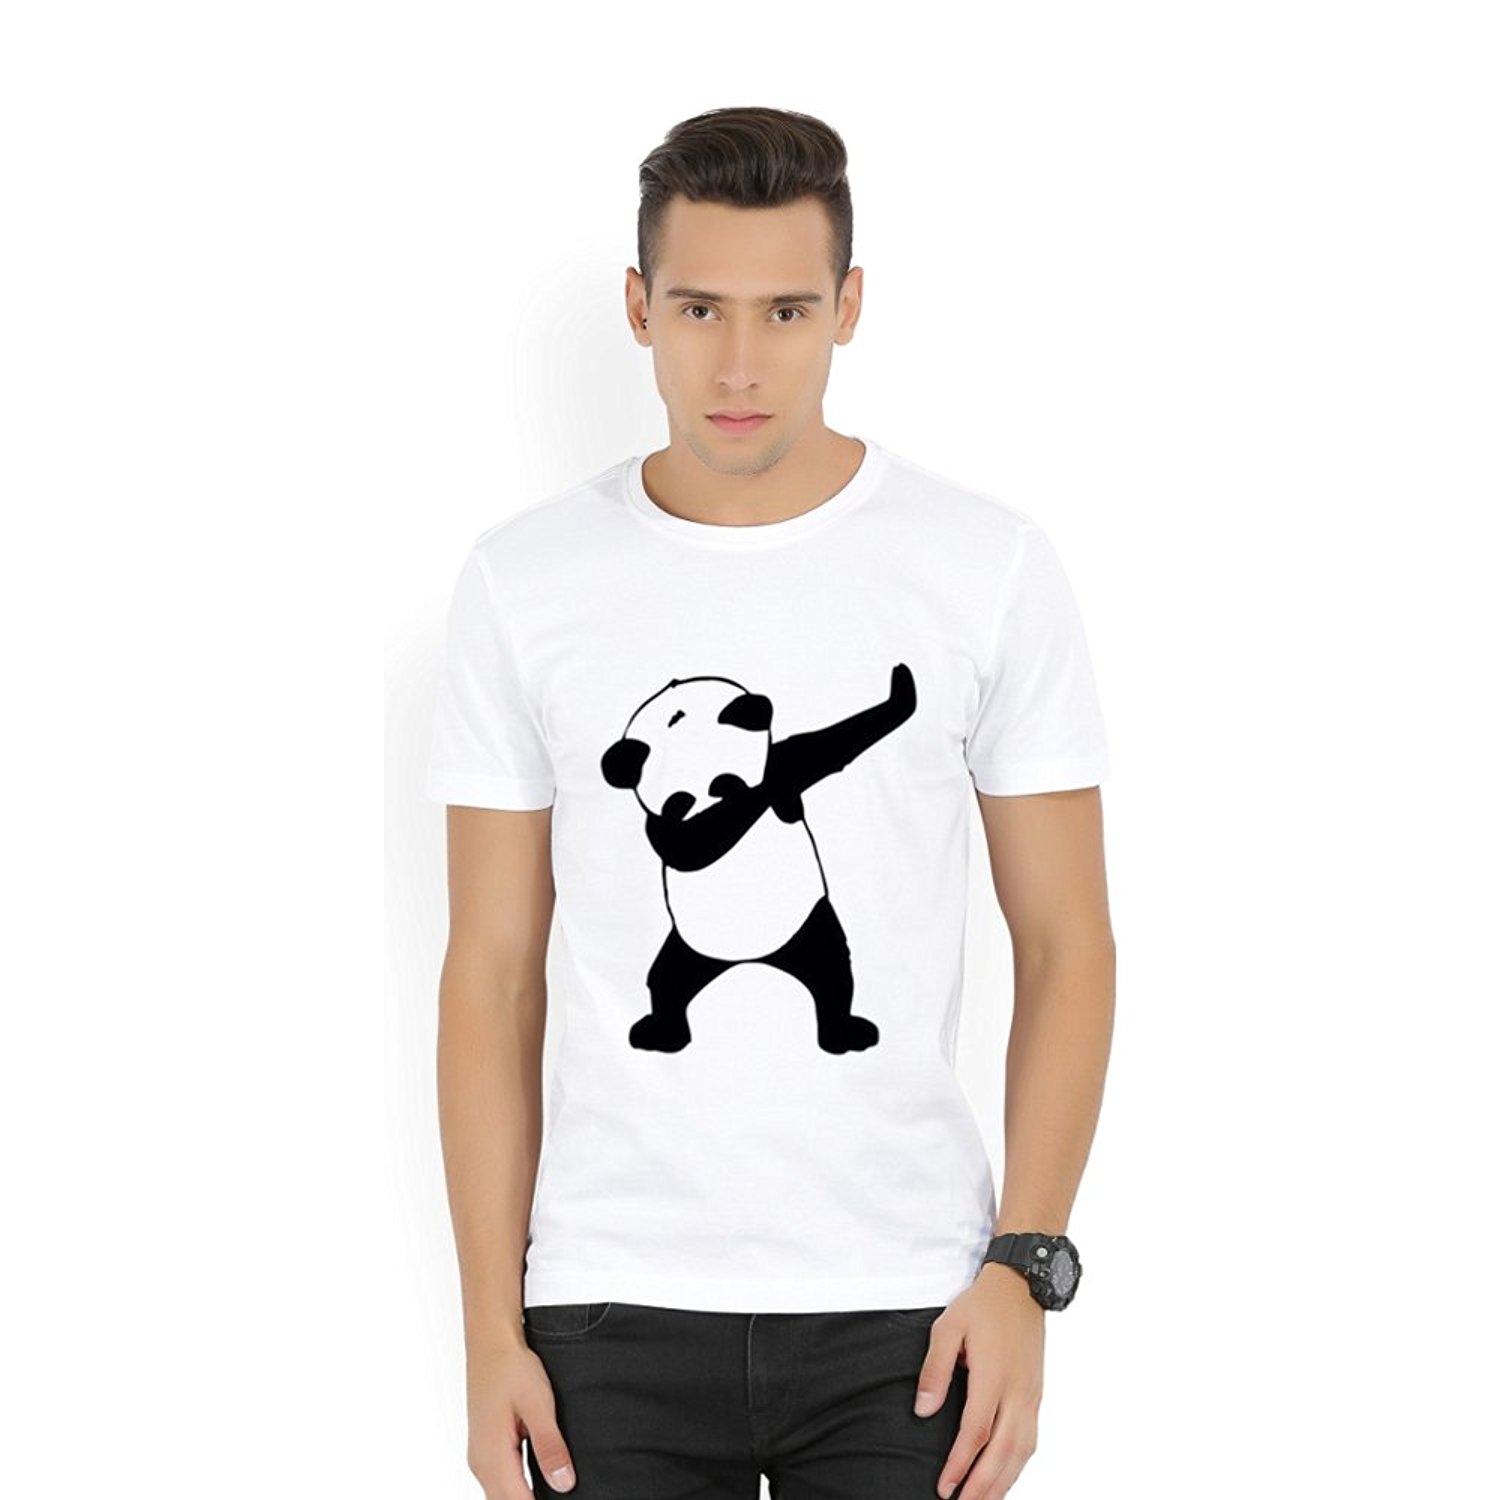 DOUBLE F ROUND NECK HALF SLEEVE PANDA PRINTED T-SHIRT FOR MEN